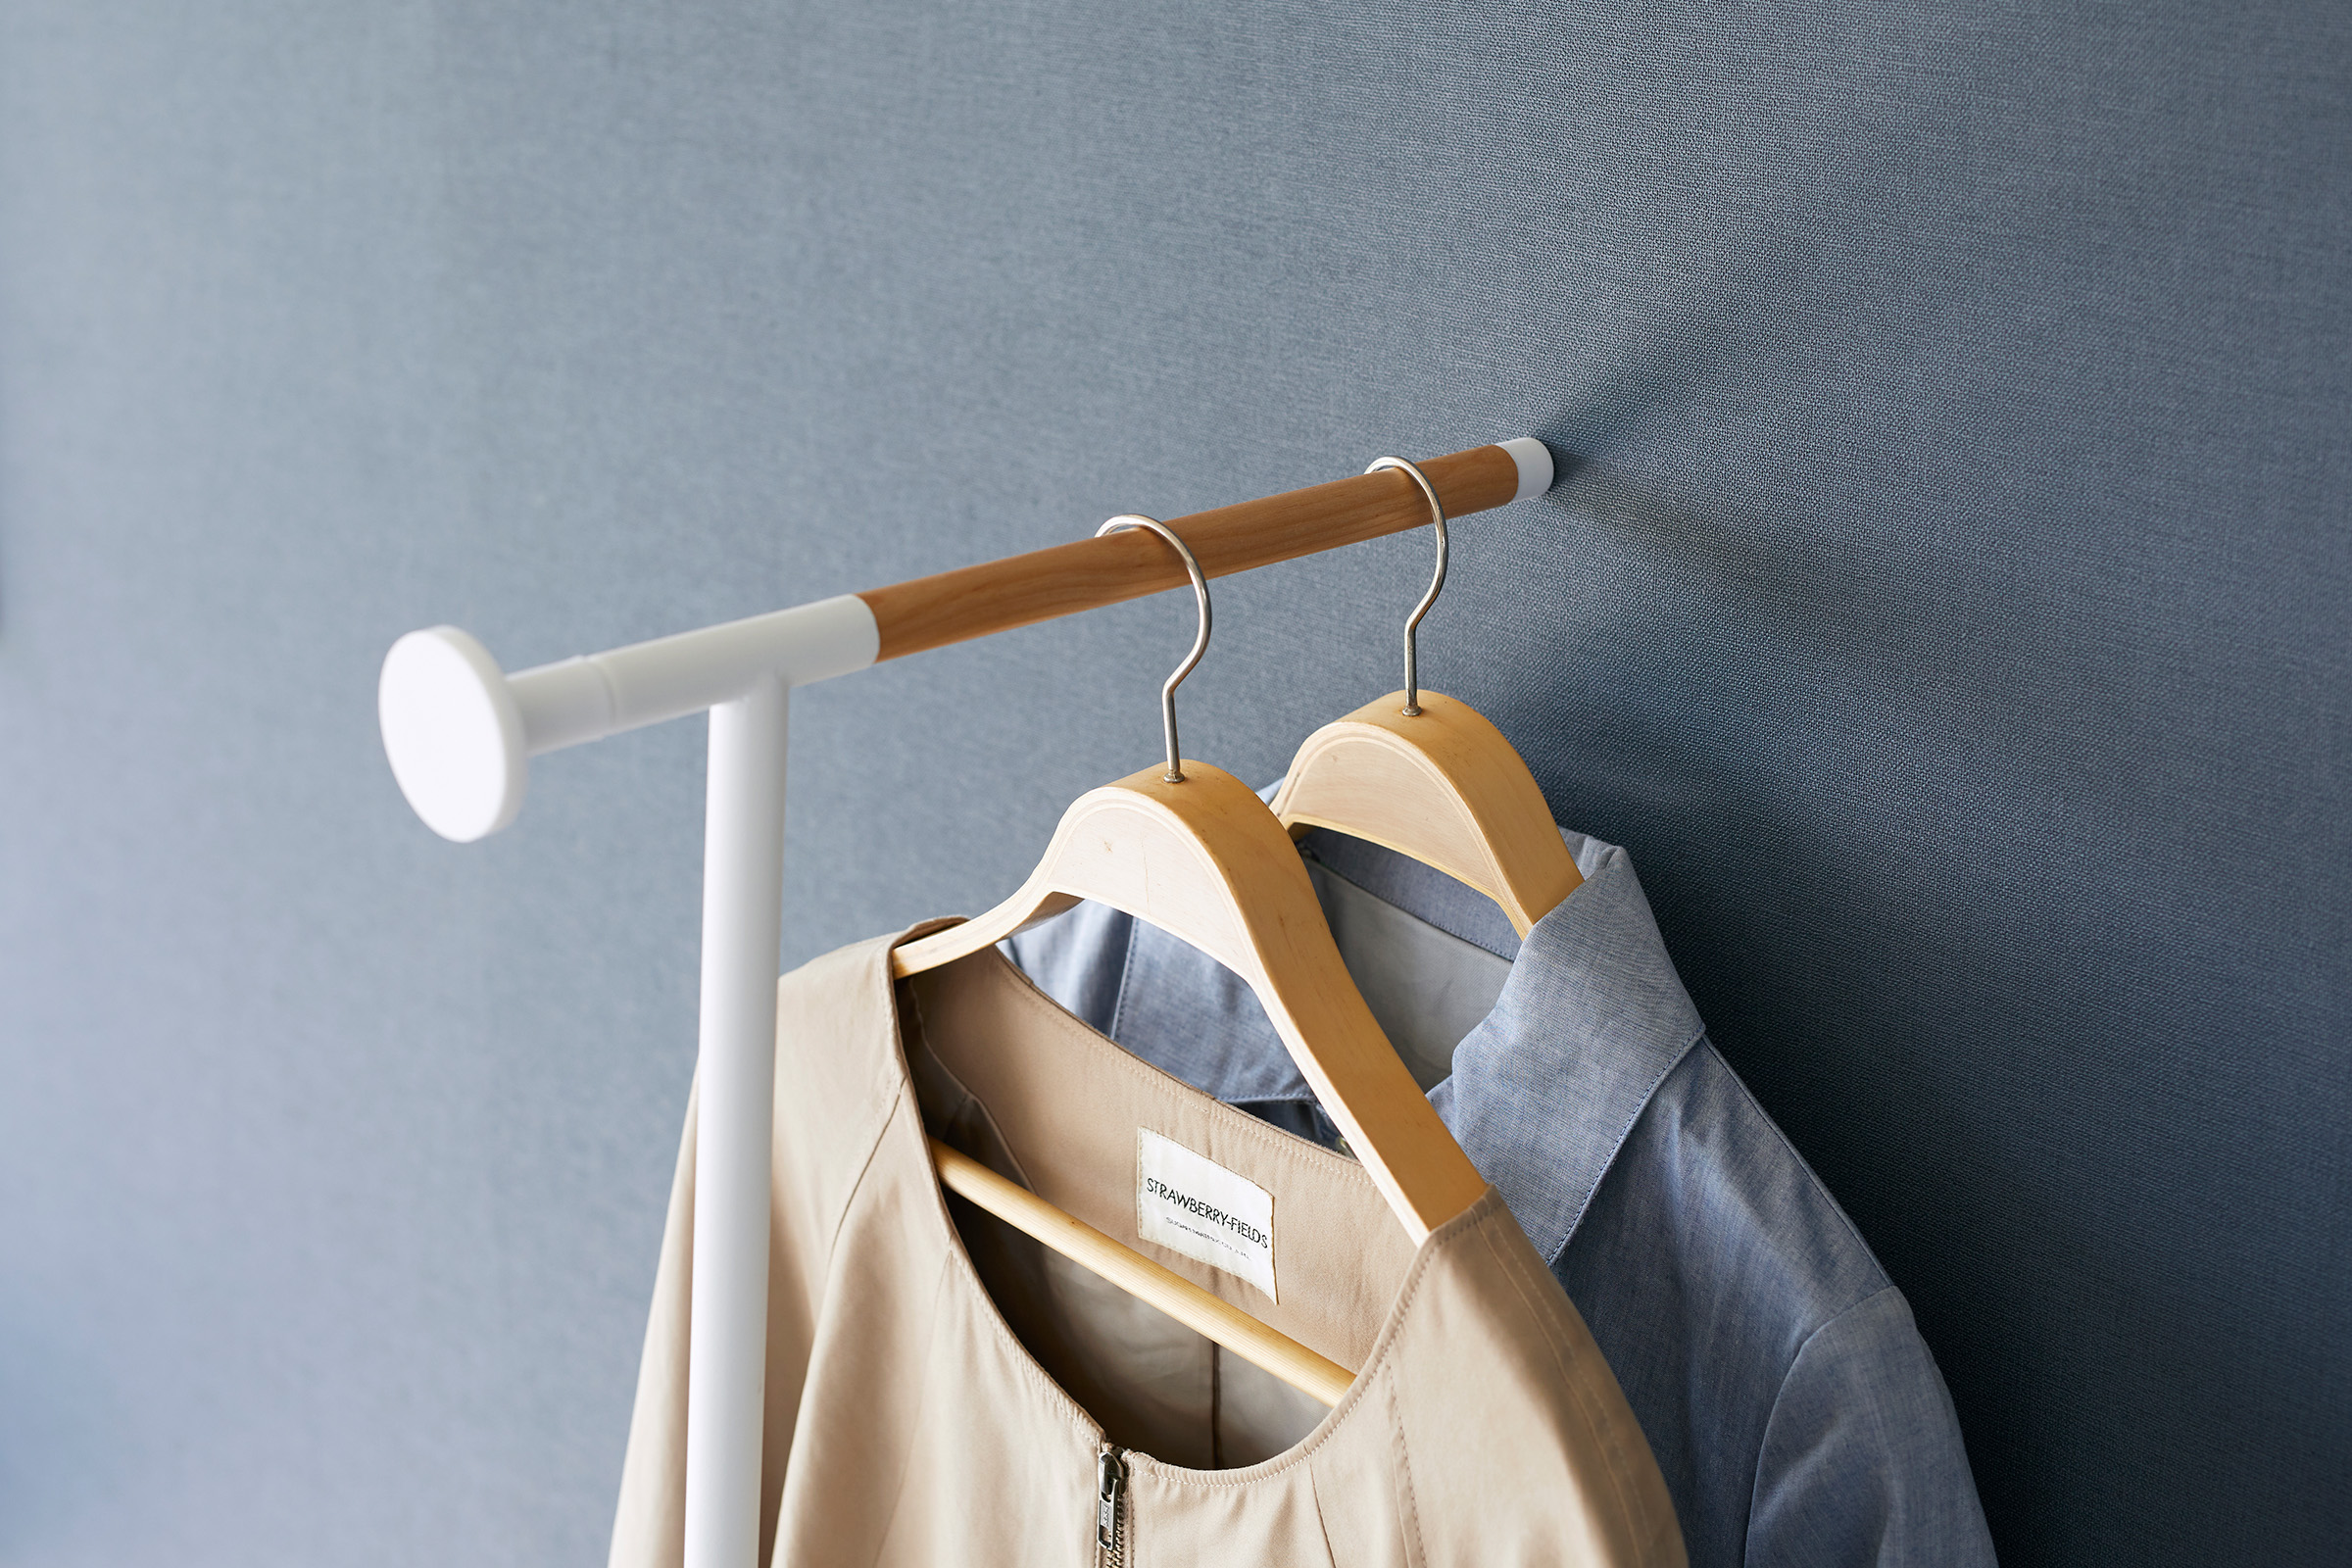 The top part of the Clothes Steaming Leaning Pole Hanger by Yamazaki Home in white leaning on a wall holding two hangers with clothes.